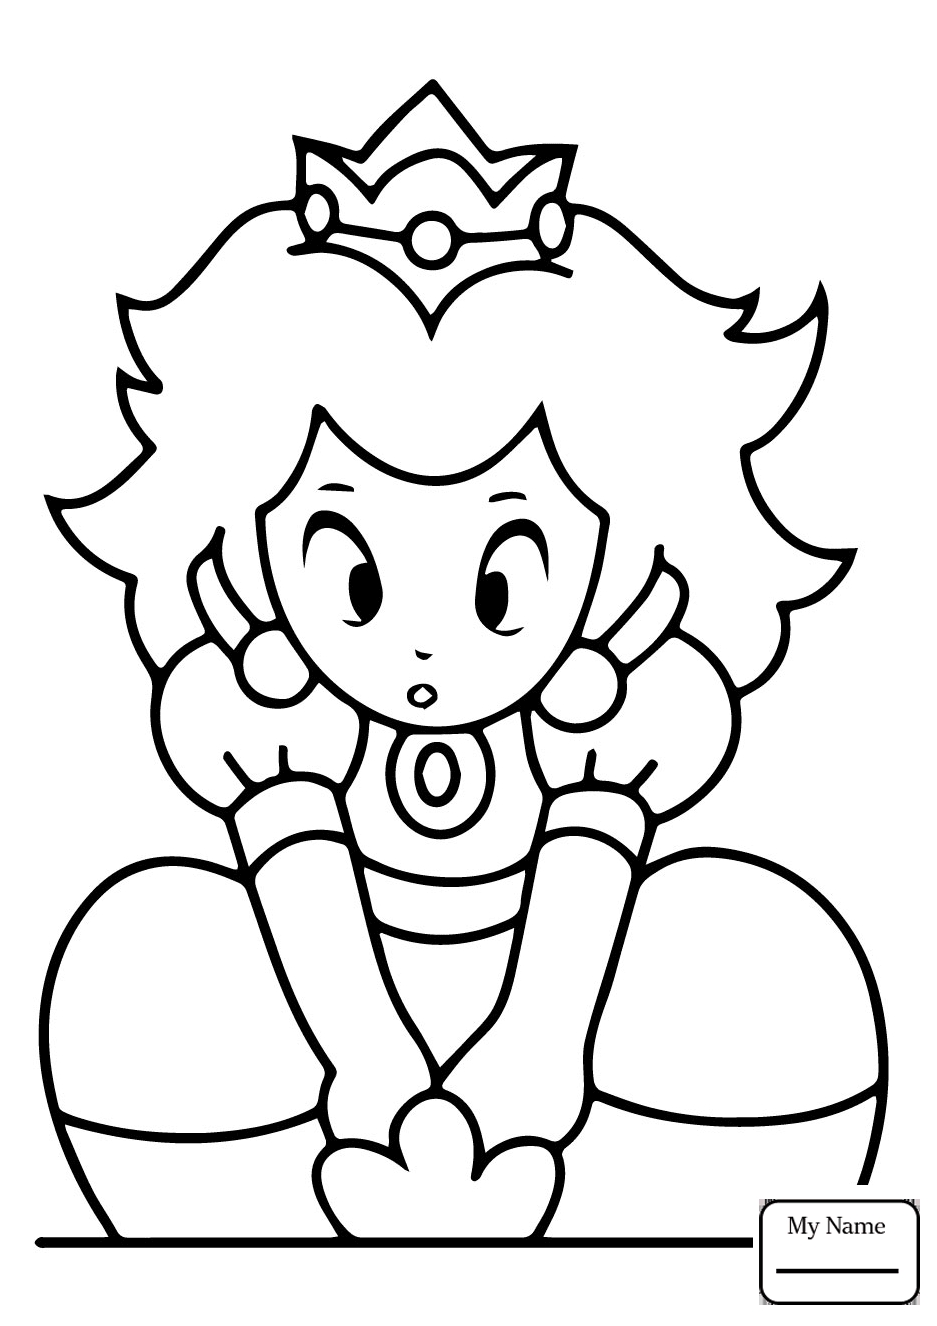 Princess Peach Coloring Pages for Kids 68